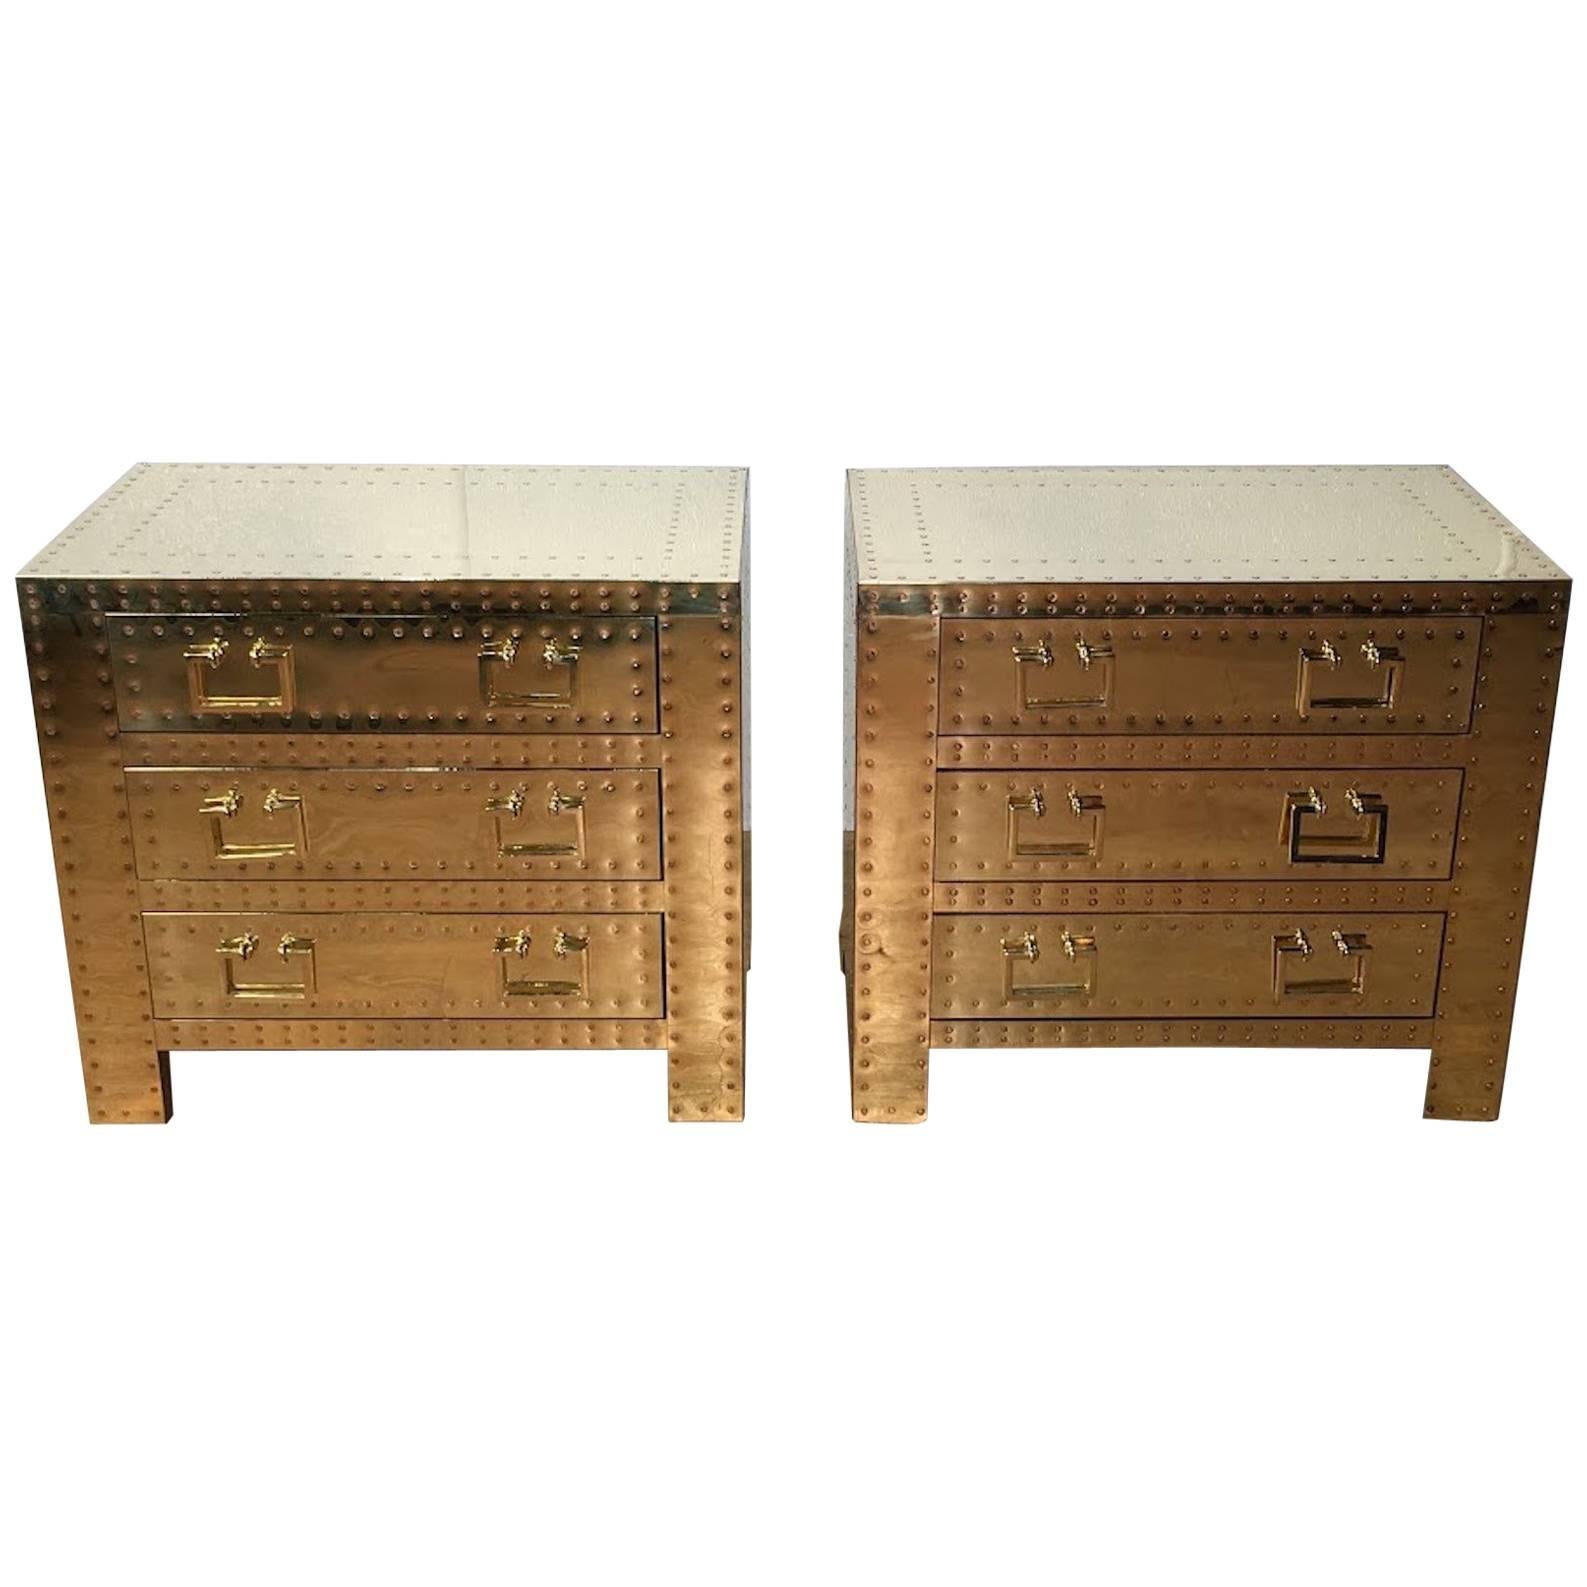 Pair of Brass Campaign Style Studded Chests or Nightstands, with 3 drawers Each